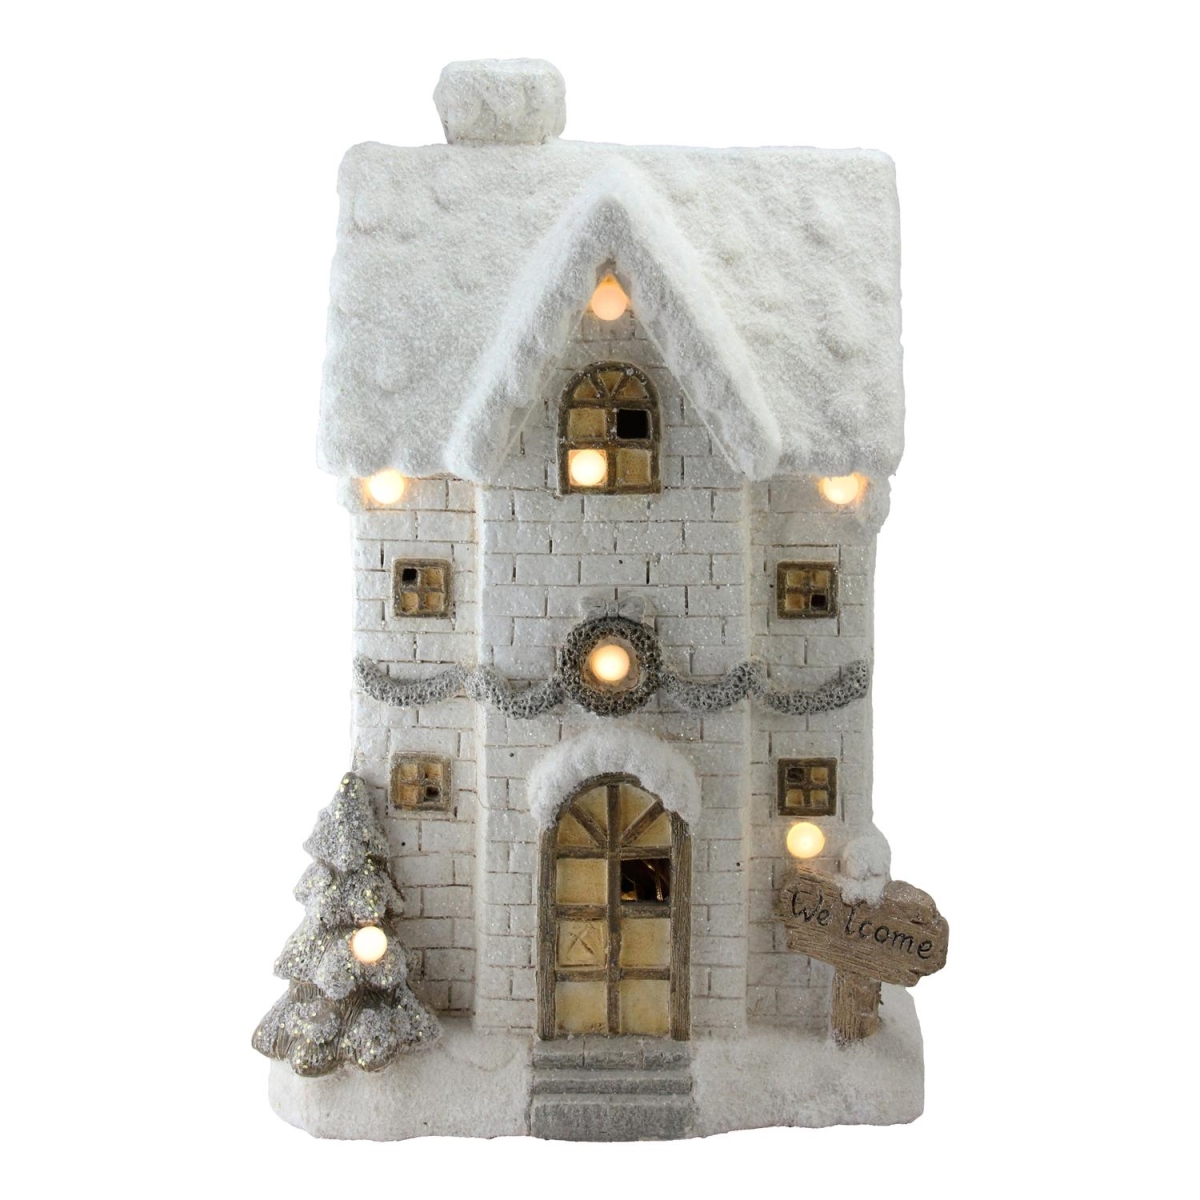 32625572 22.5 In. Snowy Brick House Christmas Decoration